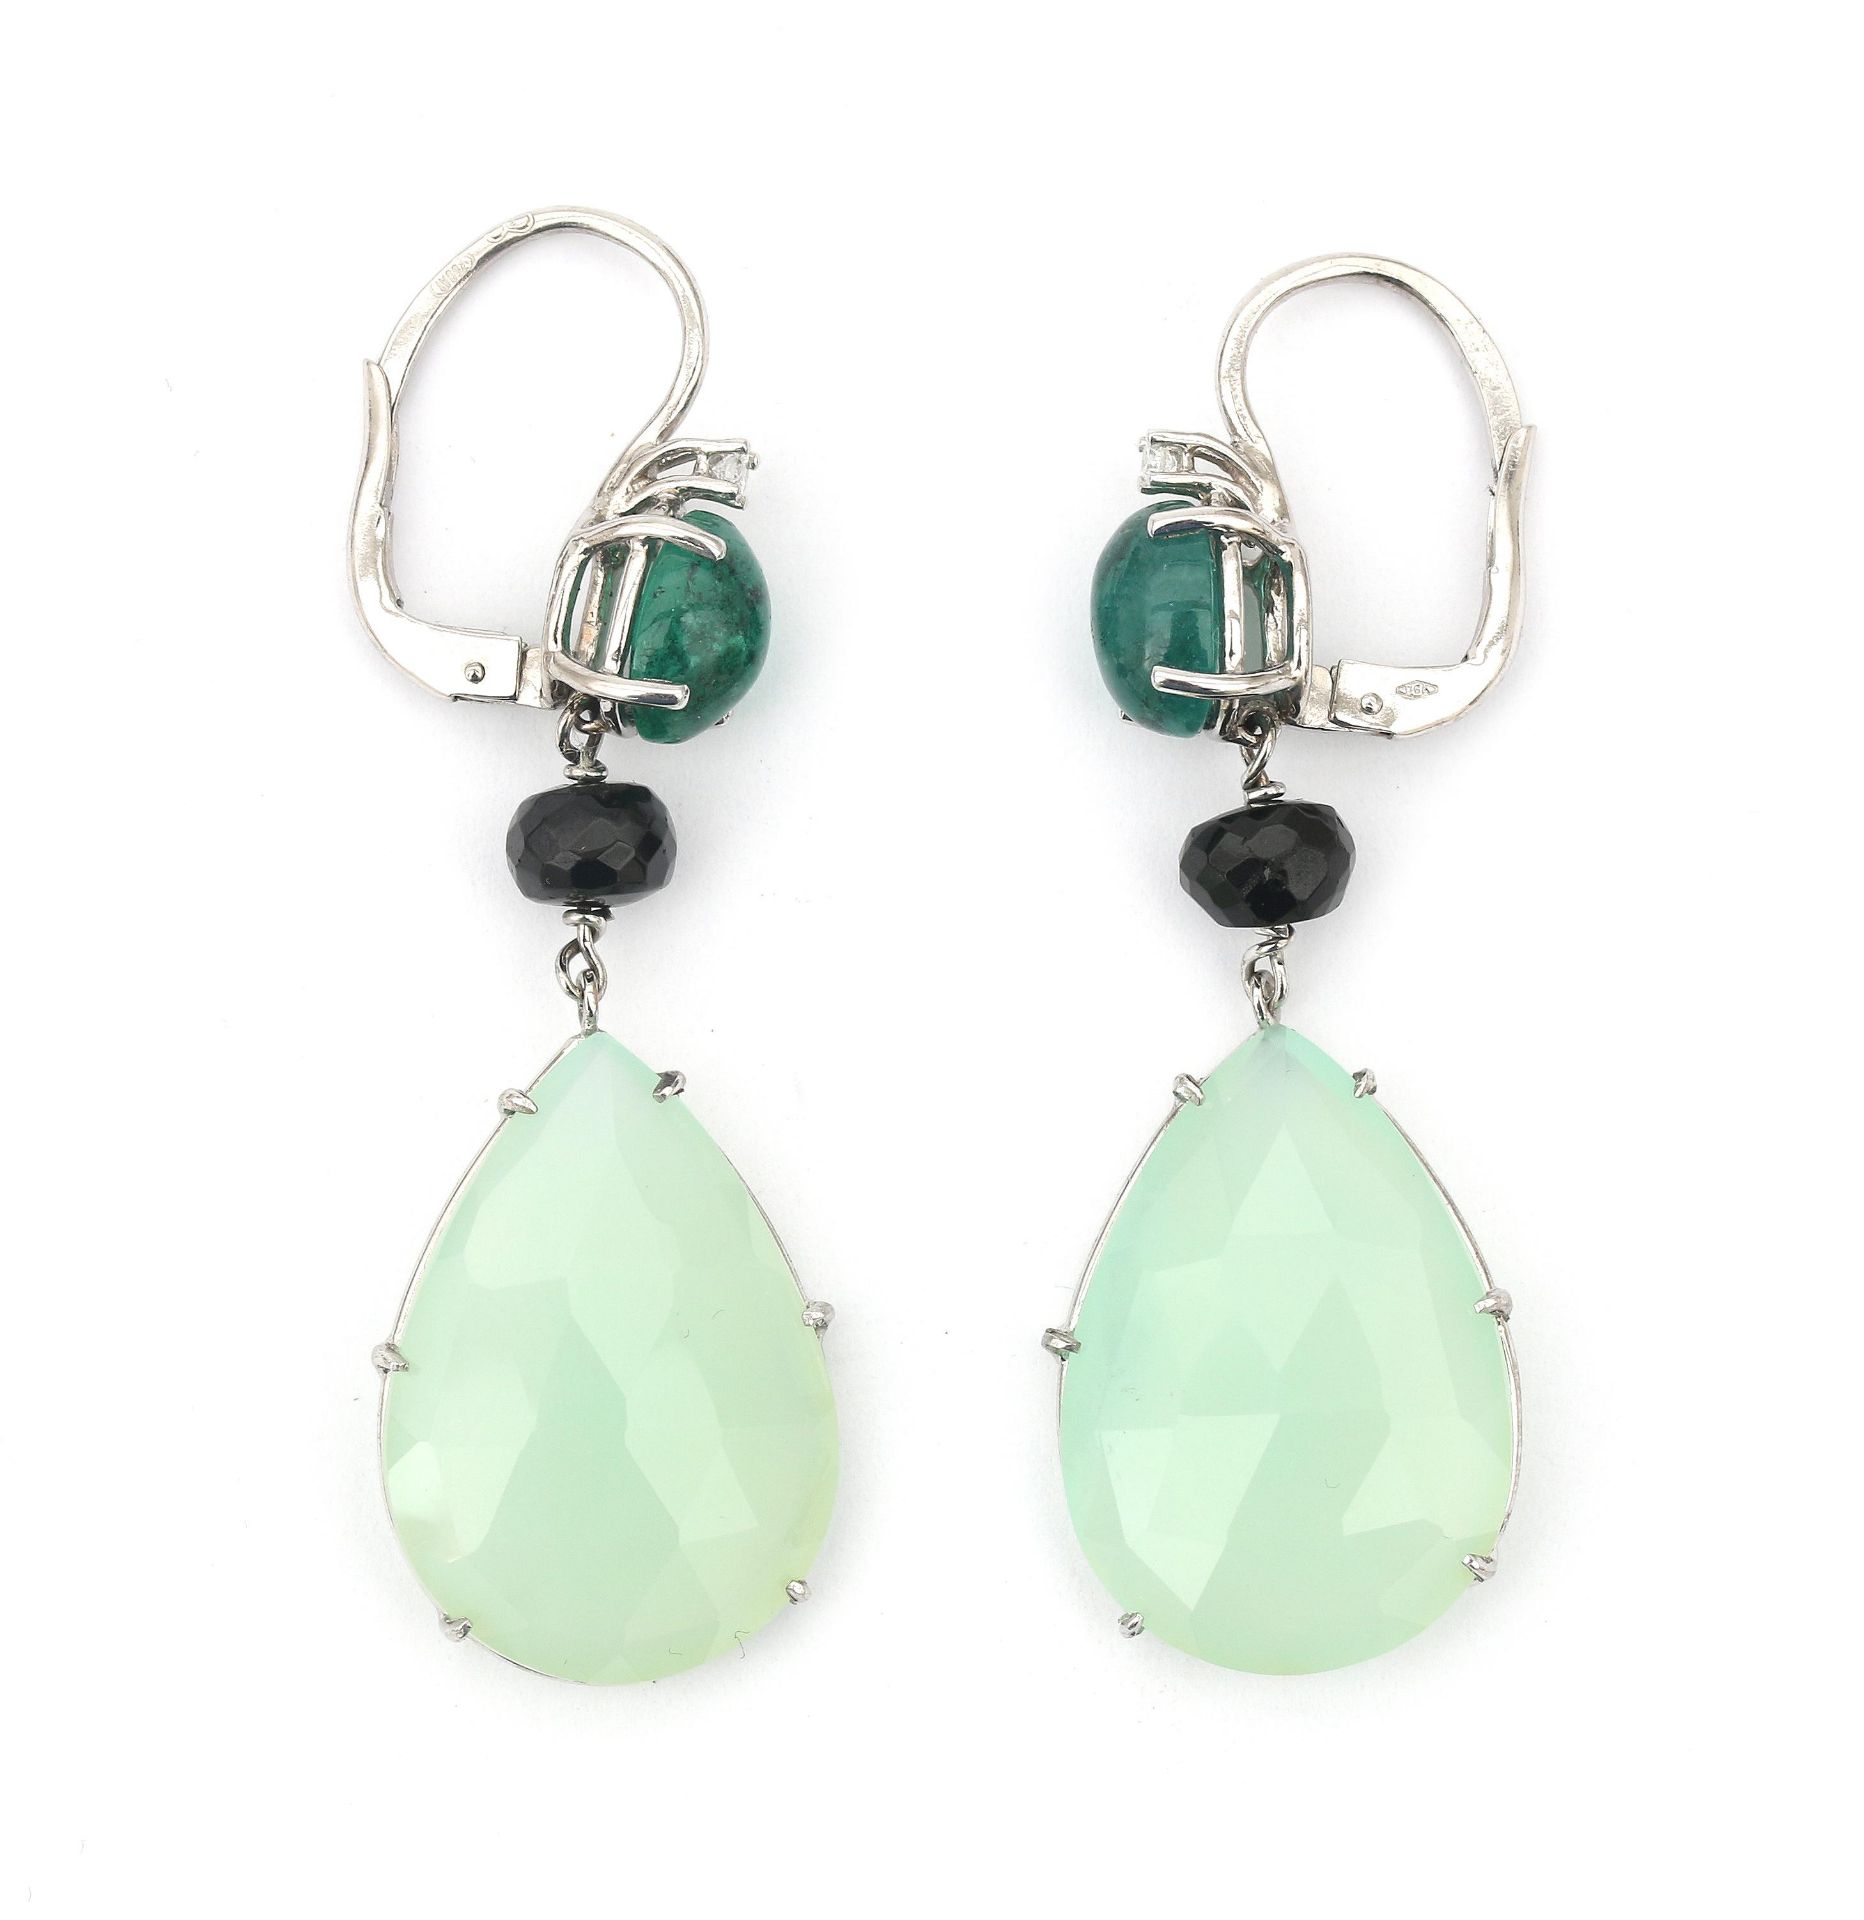 A pair of 18 karat white gold agate and emerald earrings